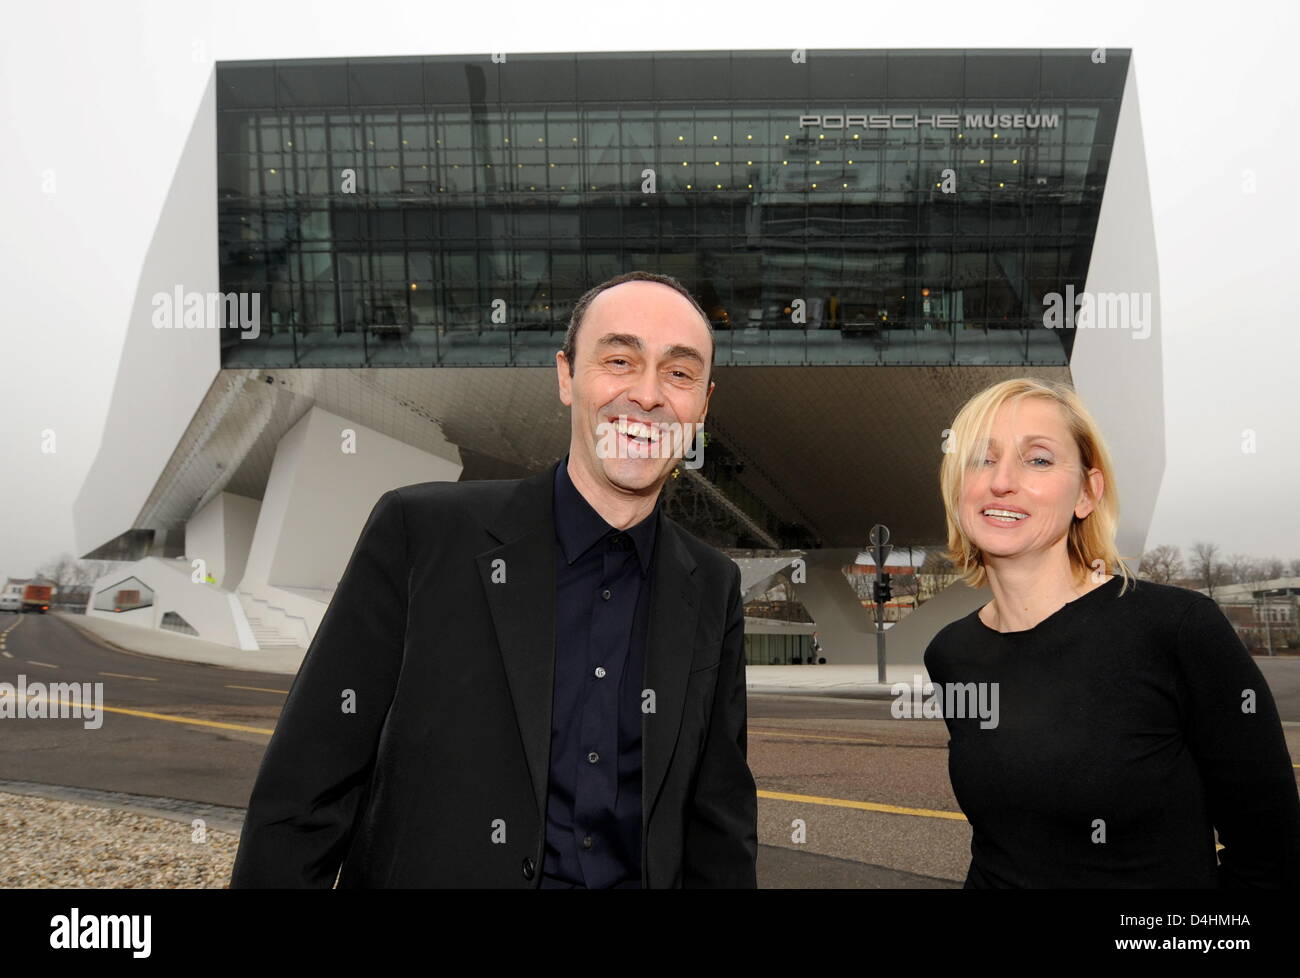 Architects Roman Delugan (L) and his wife and business partner Elke Delugan-Meissl (R) pose outside the building they designed during the inauguration of the new Porsche museum in Stuttgart, Germany, 28 January 2009. The futuristic building was inaugurated after three years of construction and will be opened for visitors on 31 January. A total of 82 of Porsche?s most relevant model Stock Photo